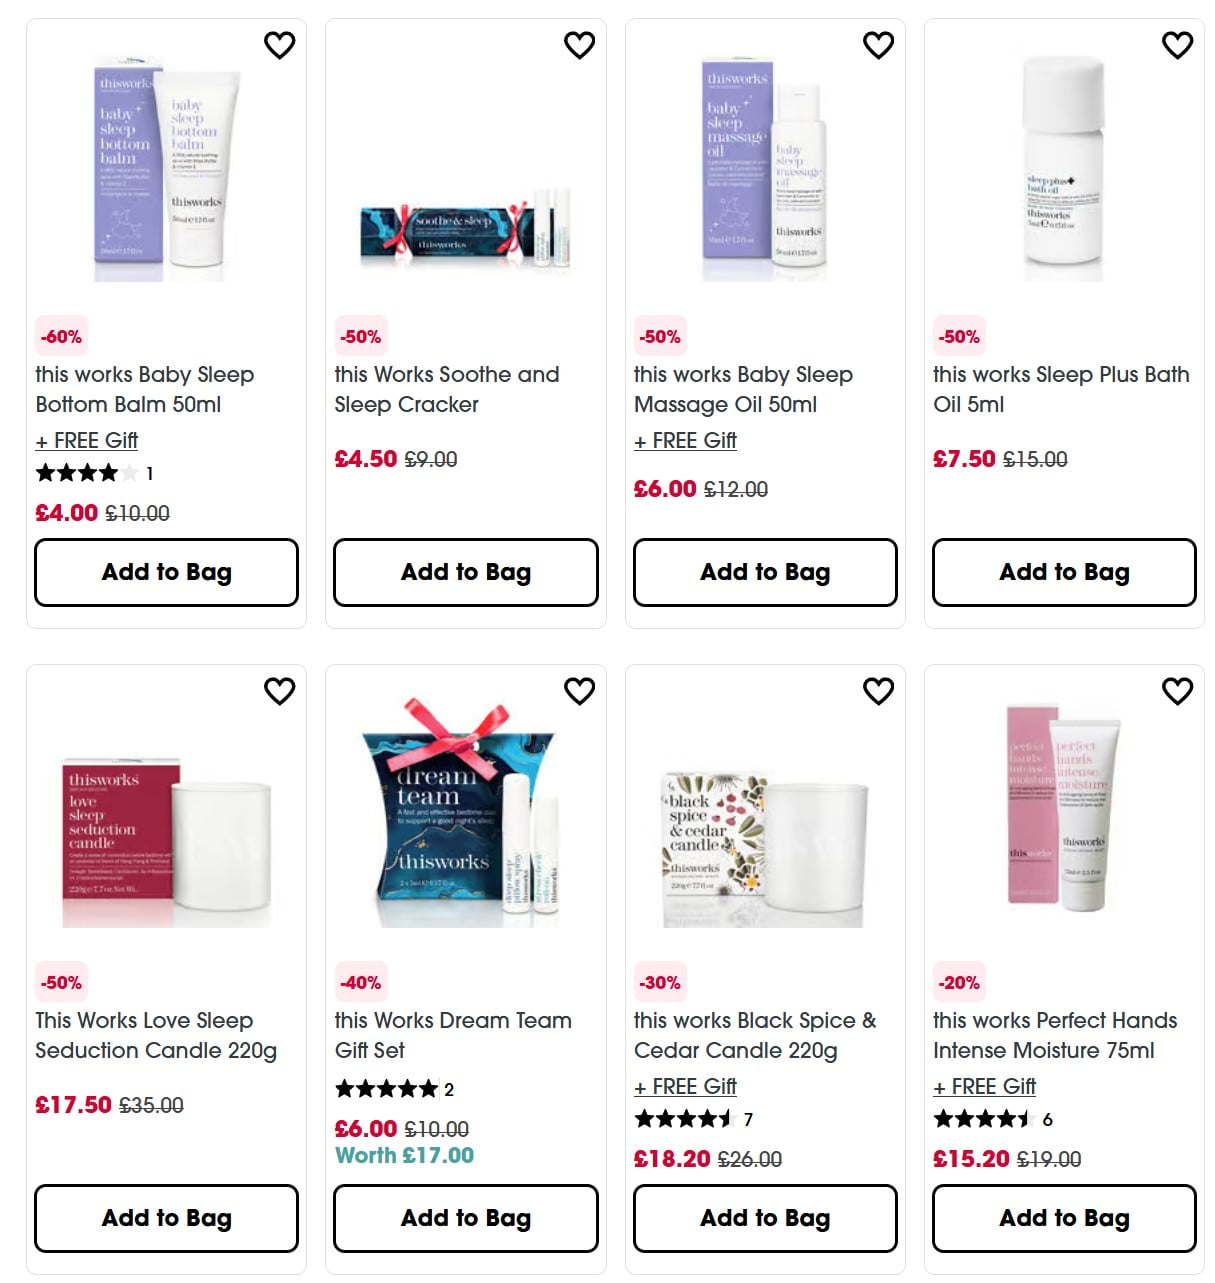 Up to 60% off this works at Sephora UK.